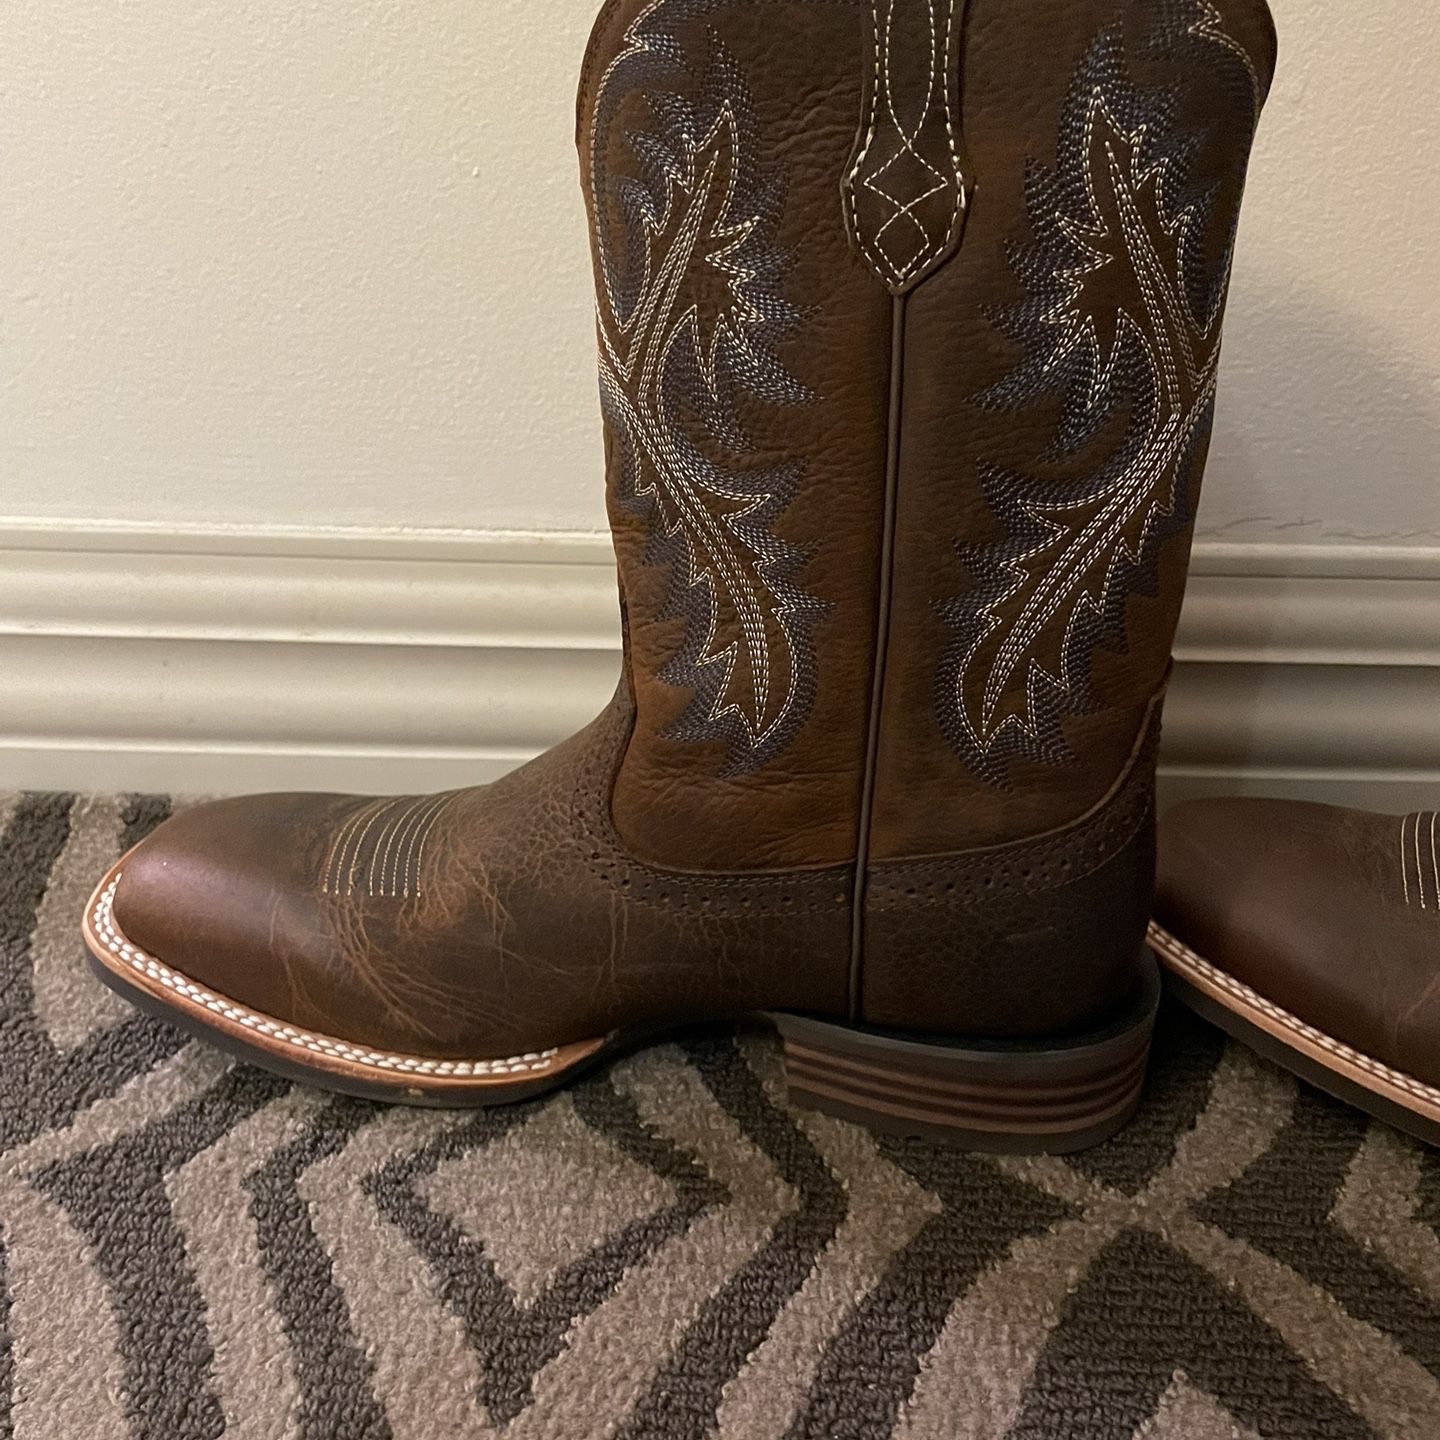 Cowboy Boots - QuickDraw - Size 11.5 